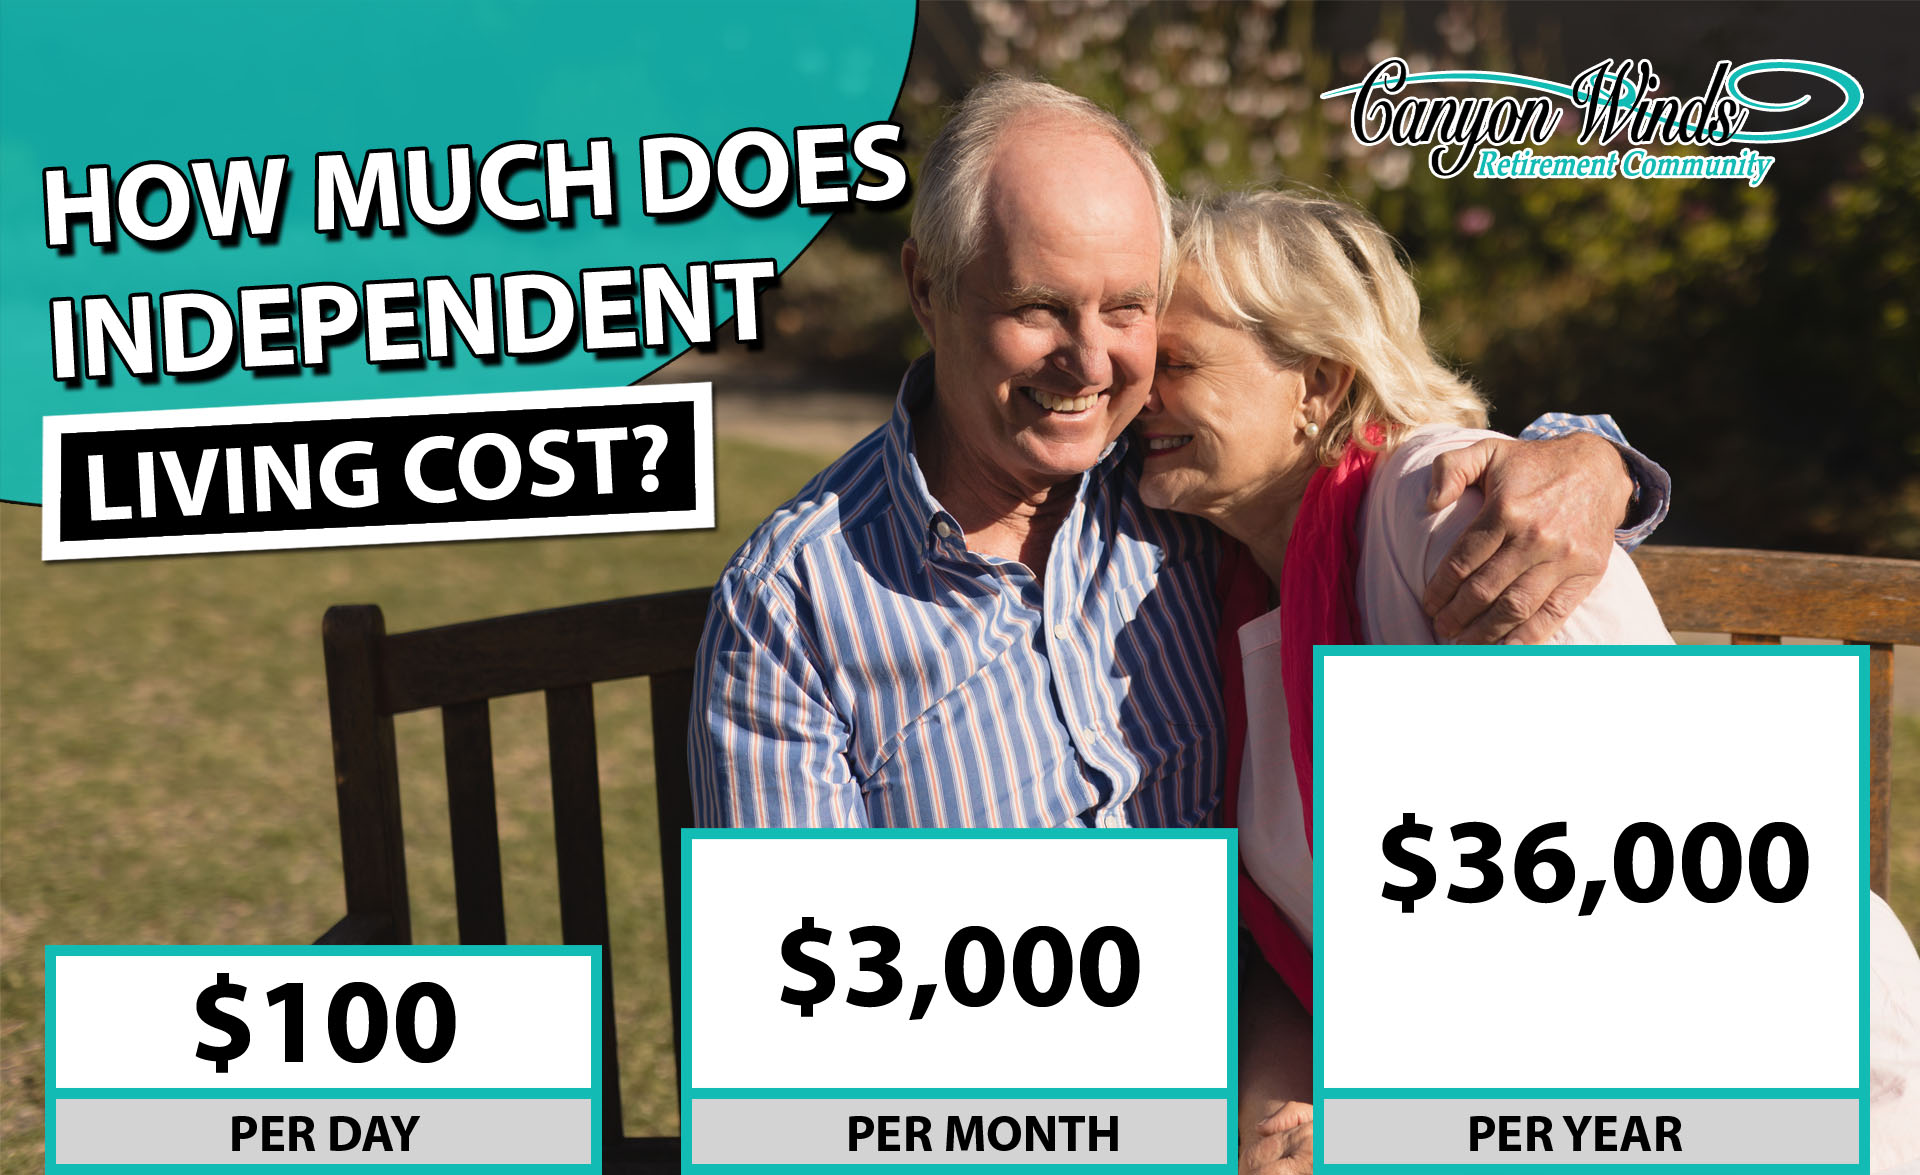 How Much Does Independent Living Cost?